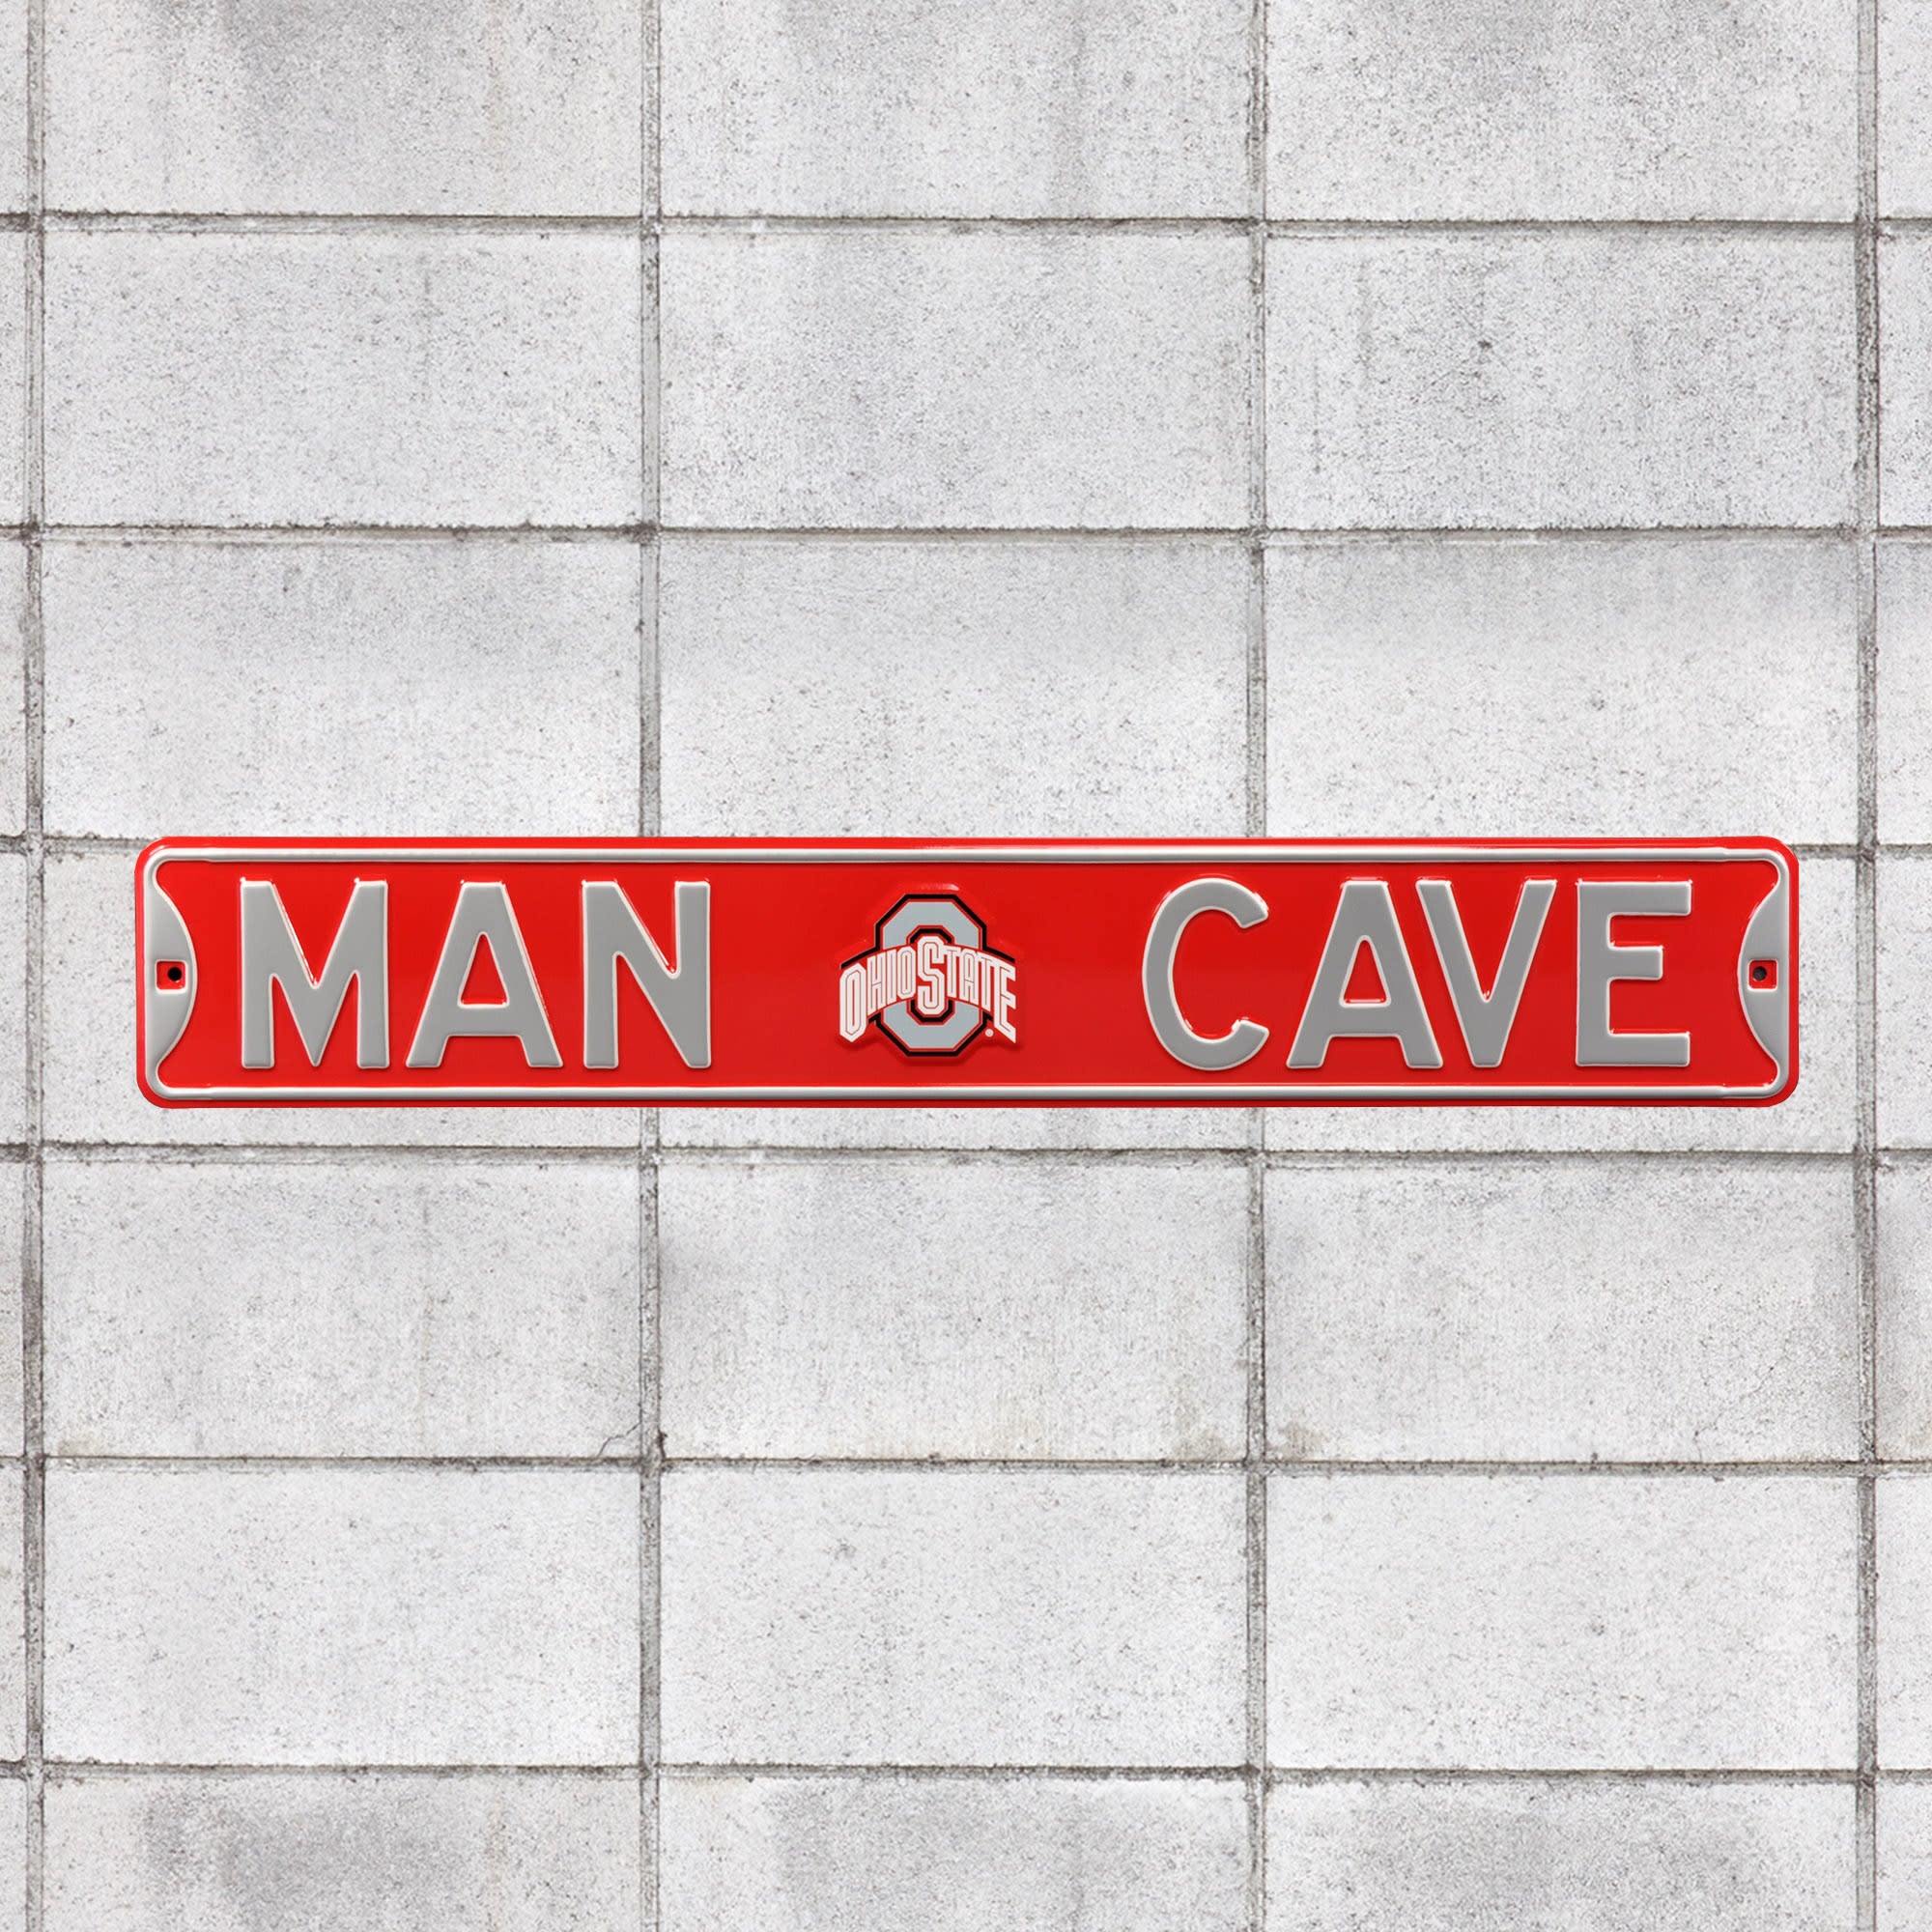 Ohio State Buckeyes: Man Cave - Officially Licensed Metal Street Sign 36.0"W x 6.0"H by Fathead | 100% Steel